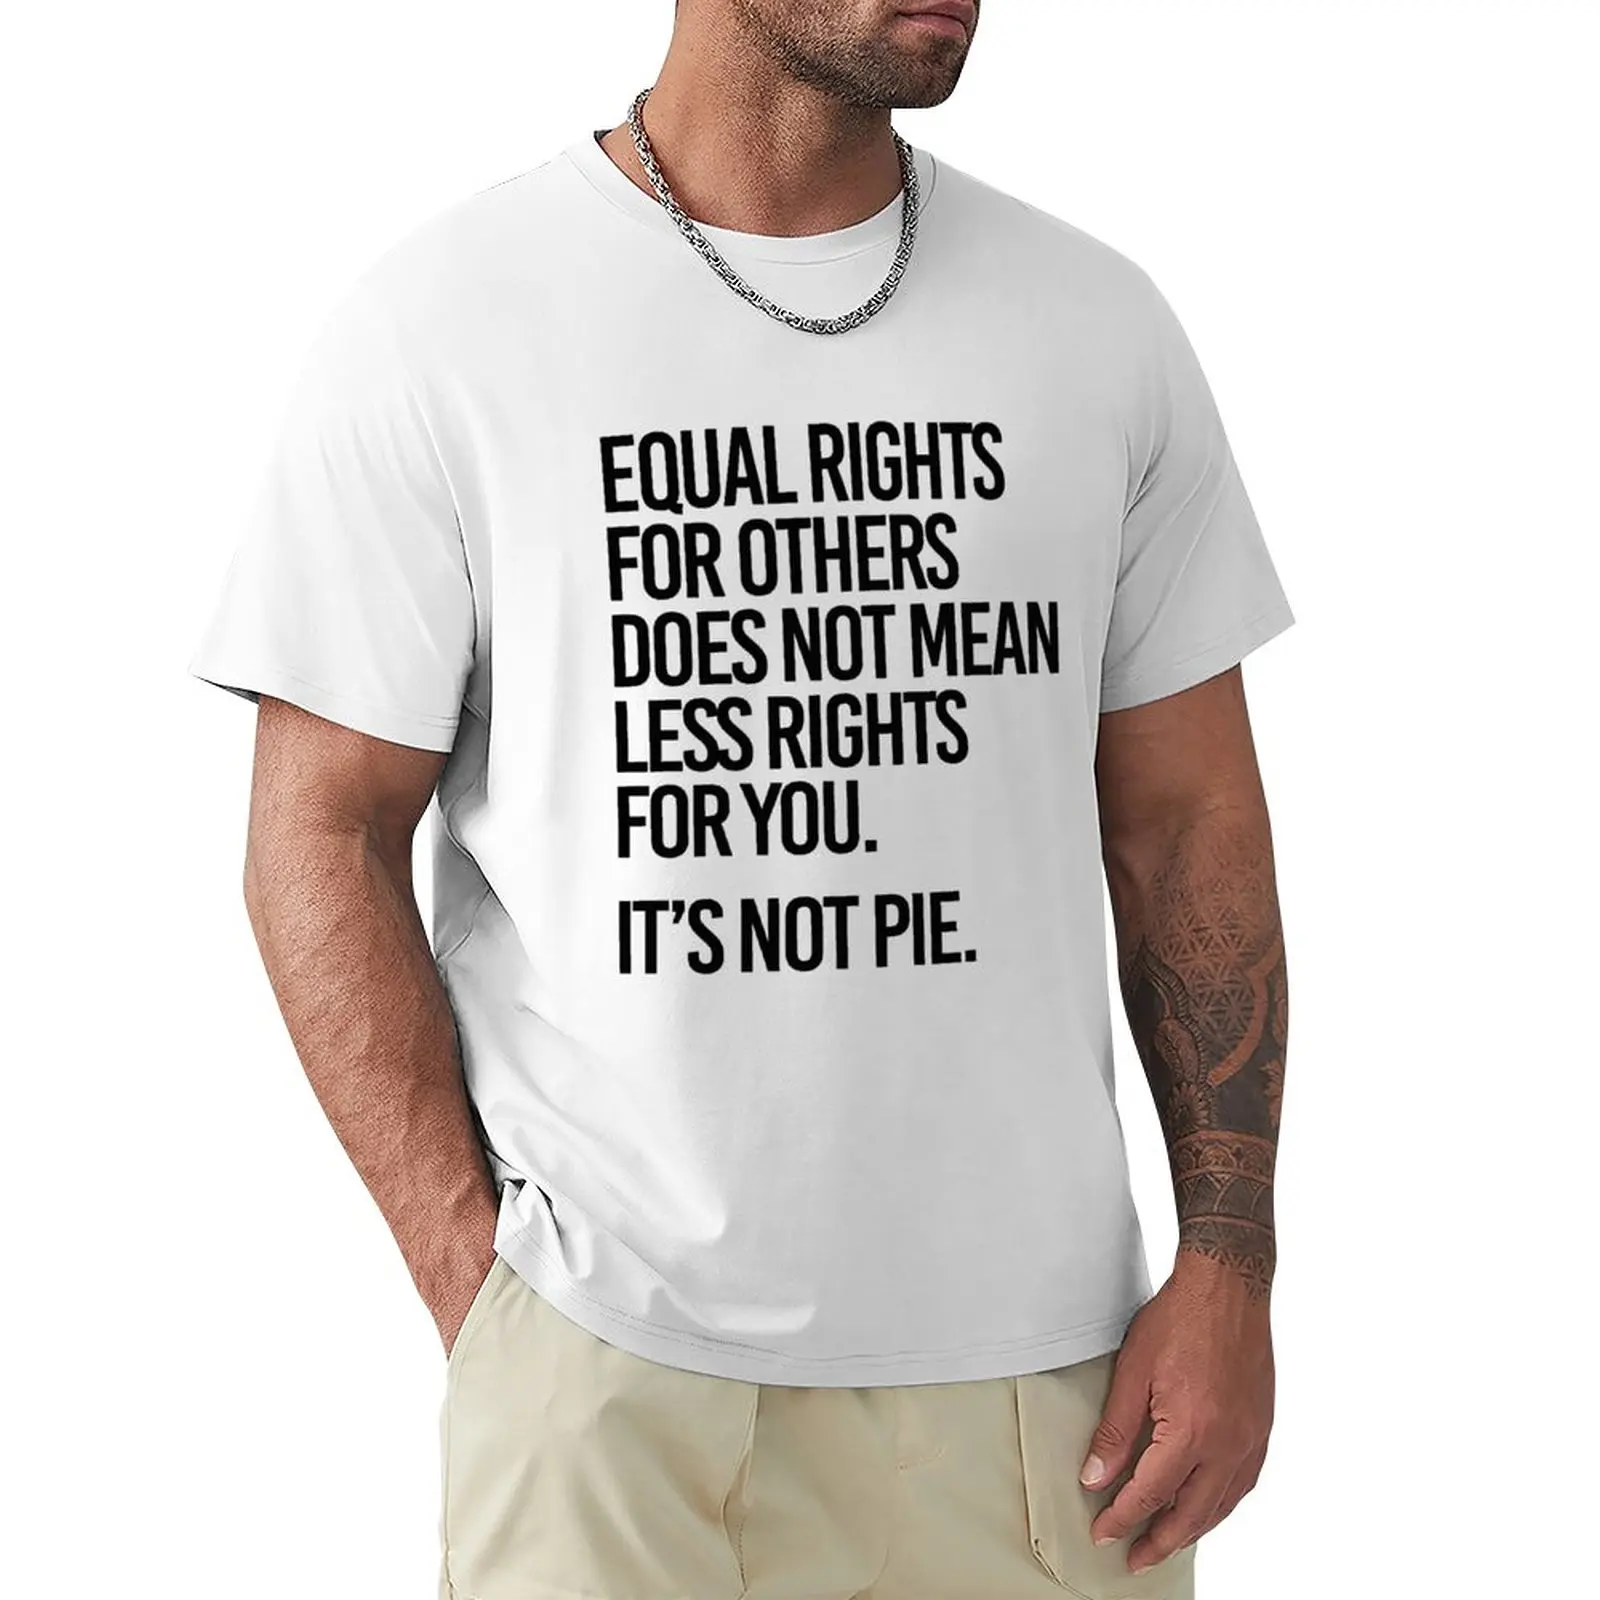 

Equal rights for others does not mean less rights for you. It's not Pie. T-Shirt Short t-shirt sports fan t-shirts T-shirt men